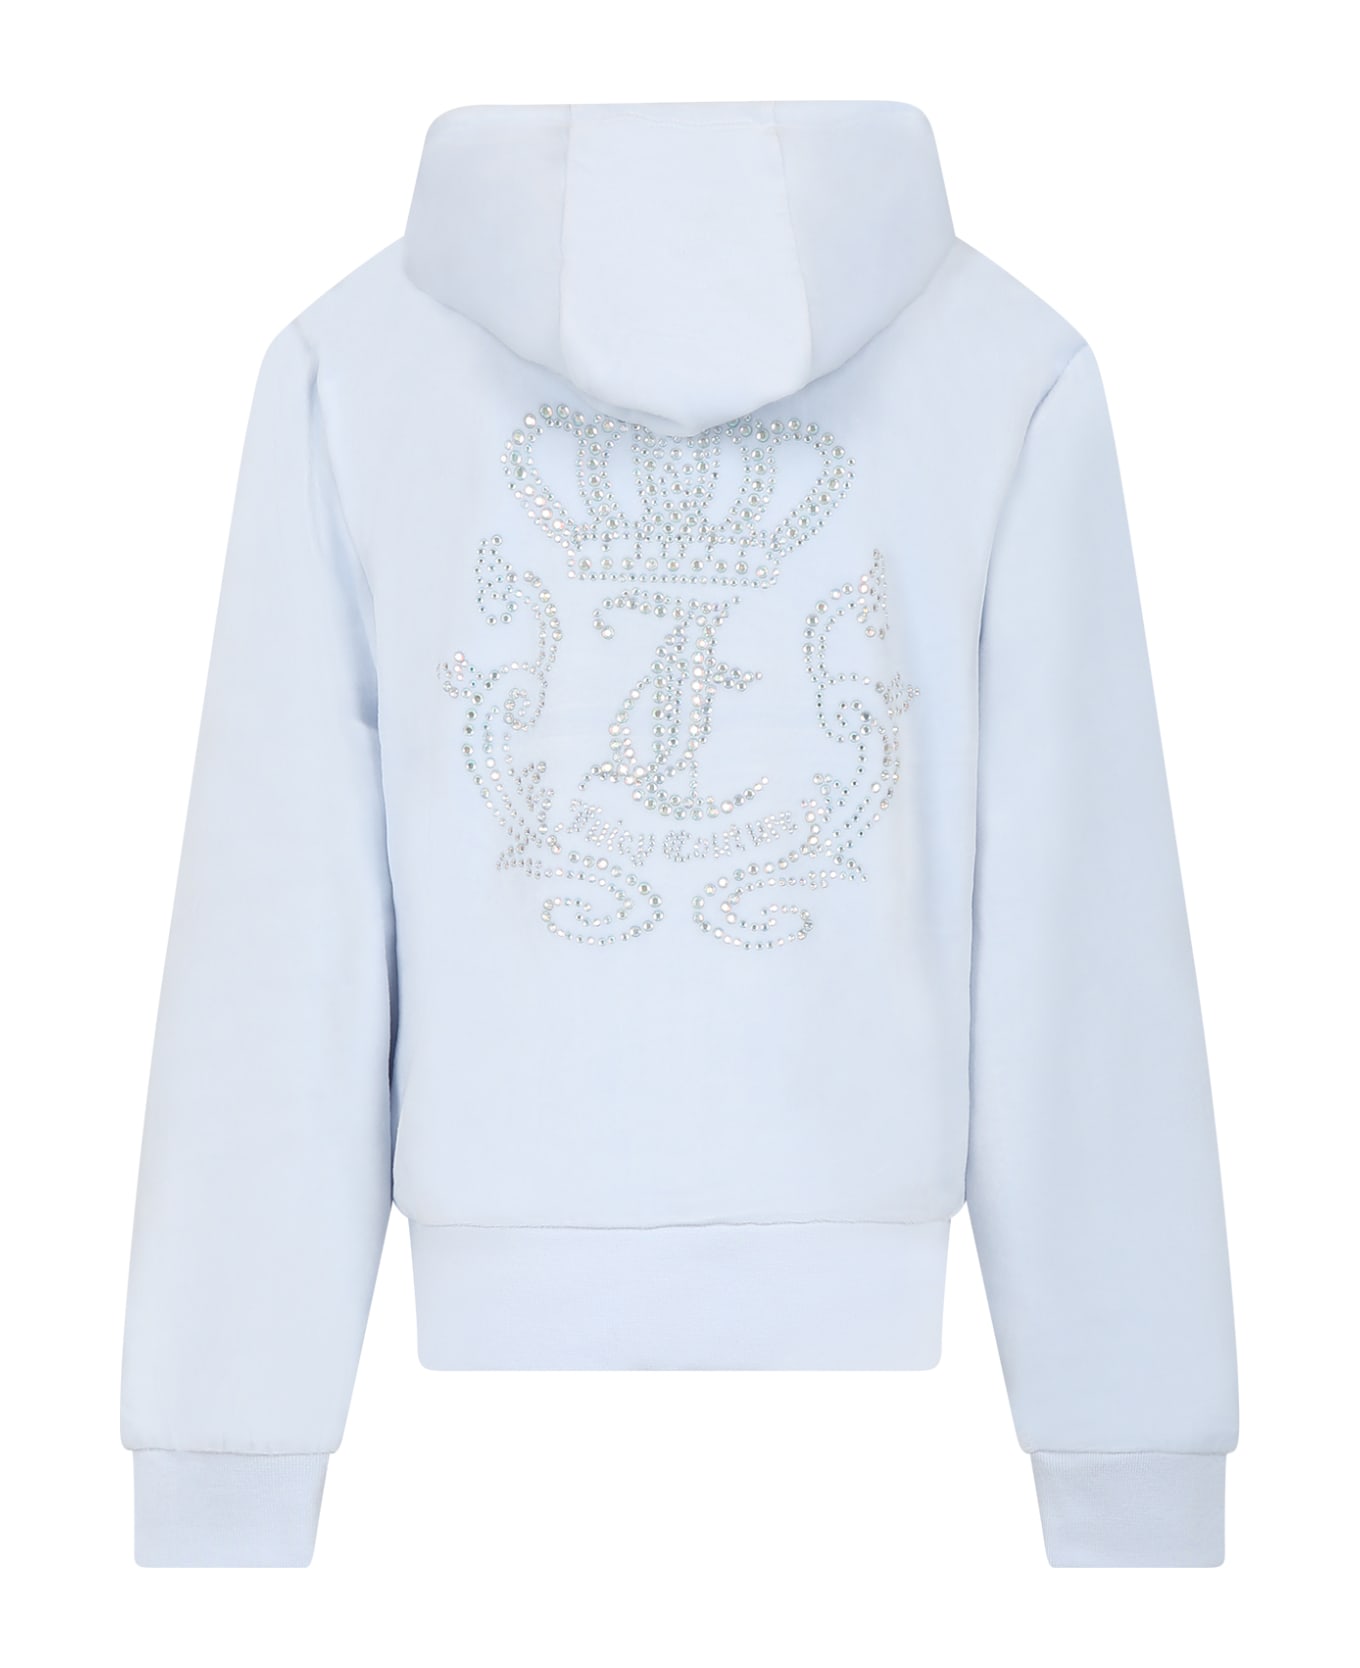 Juicy Couture Light Blue Sweatshirt For Girl With Logo - Light Blue